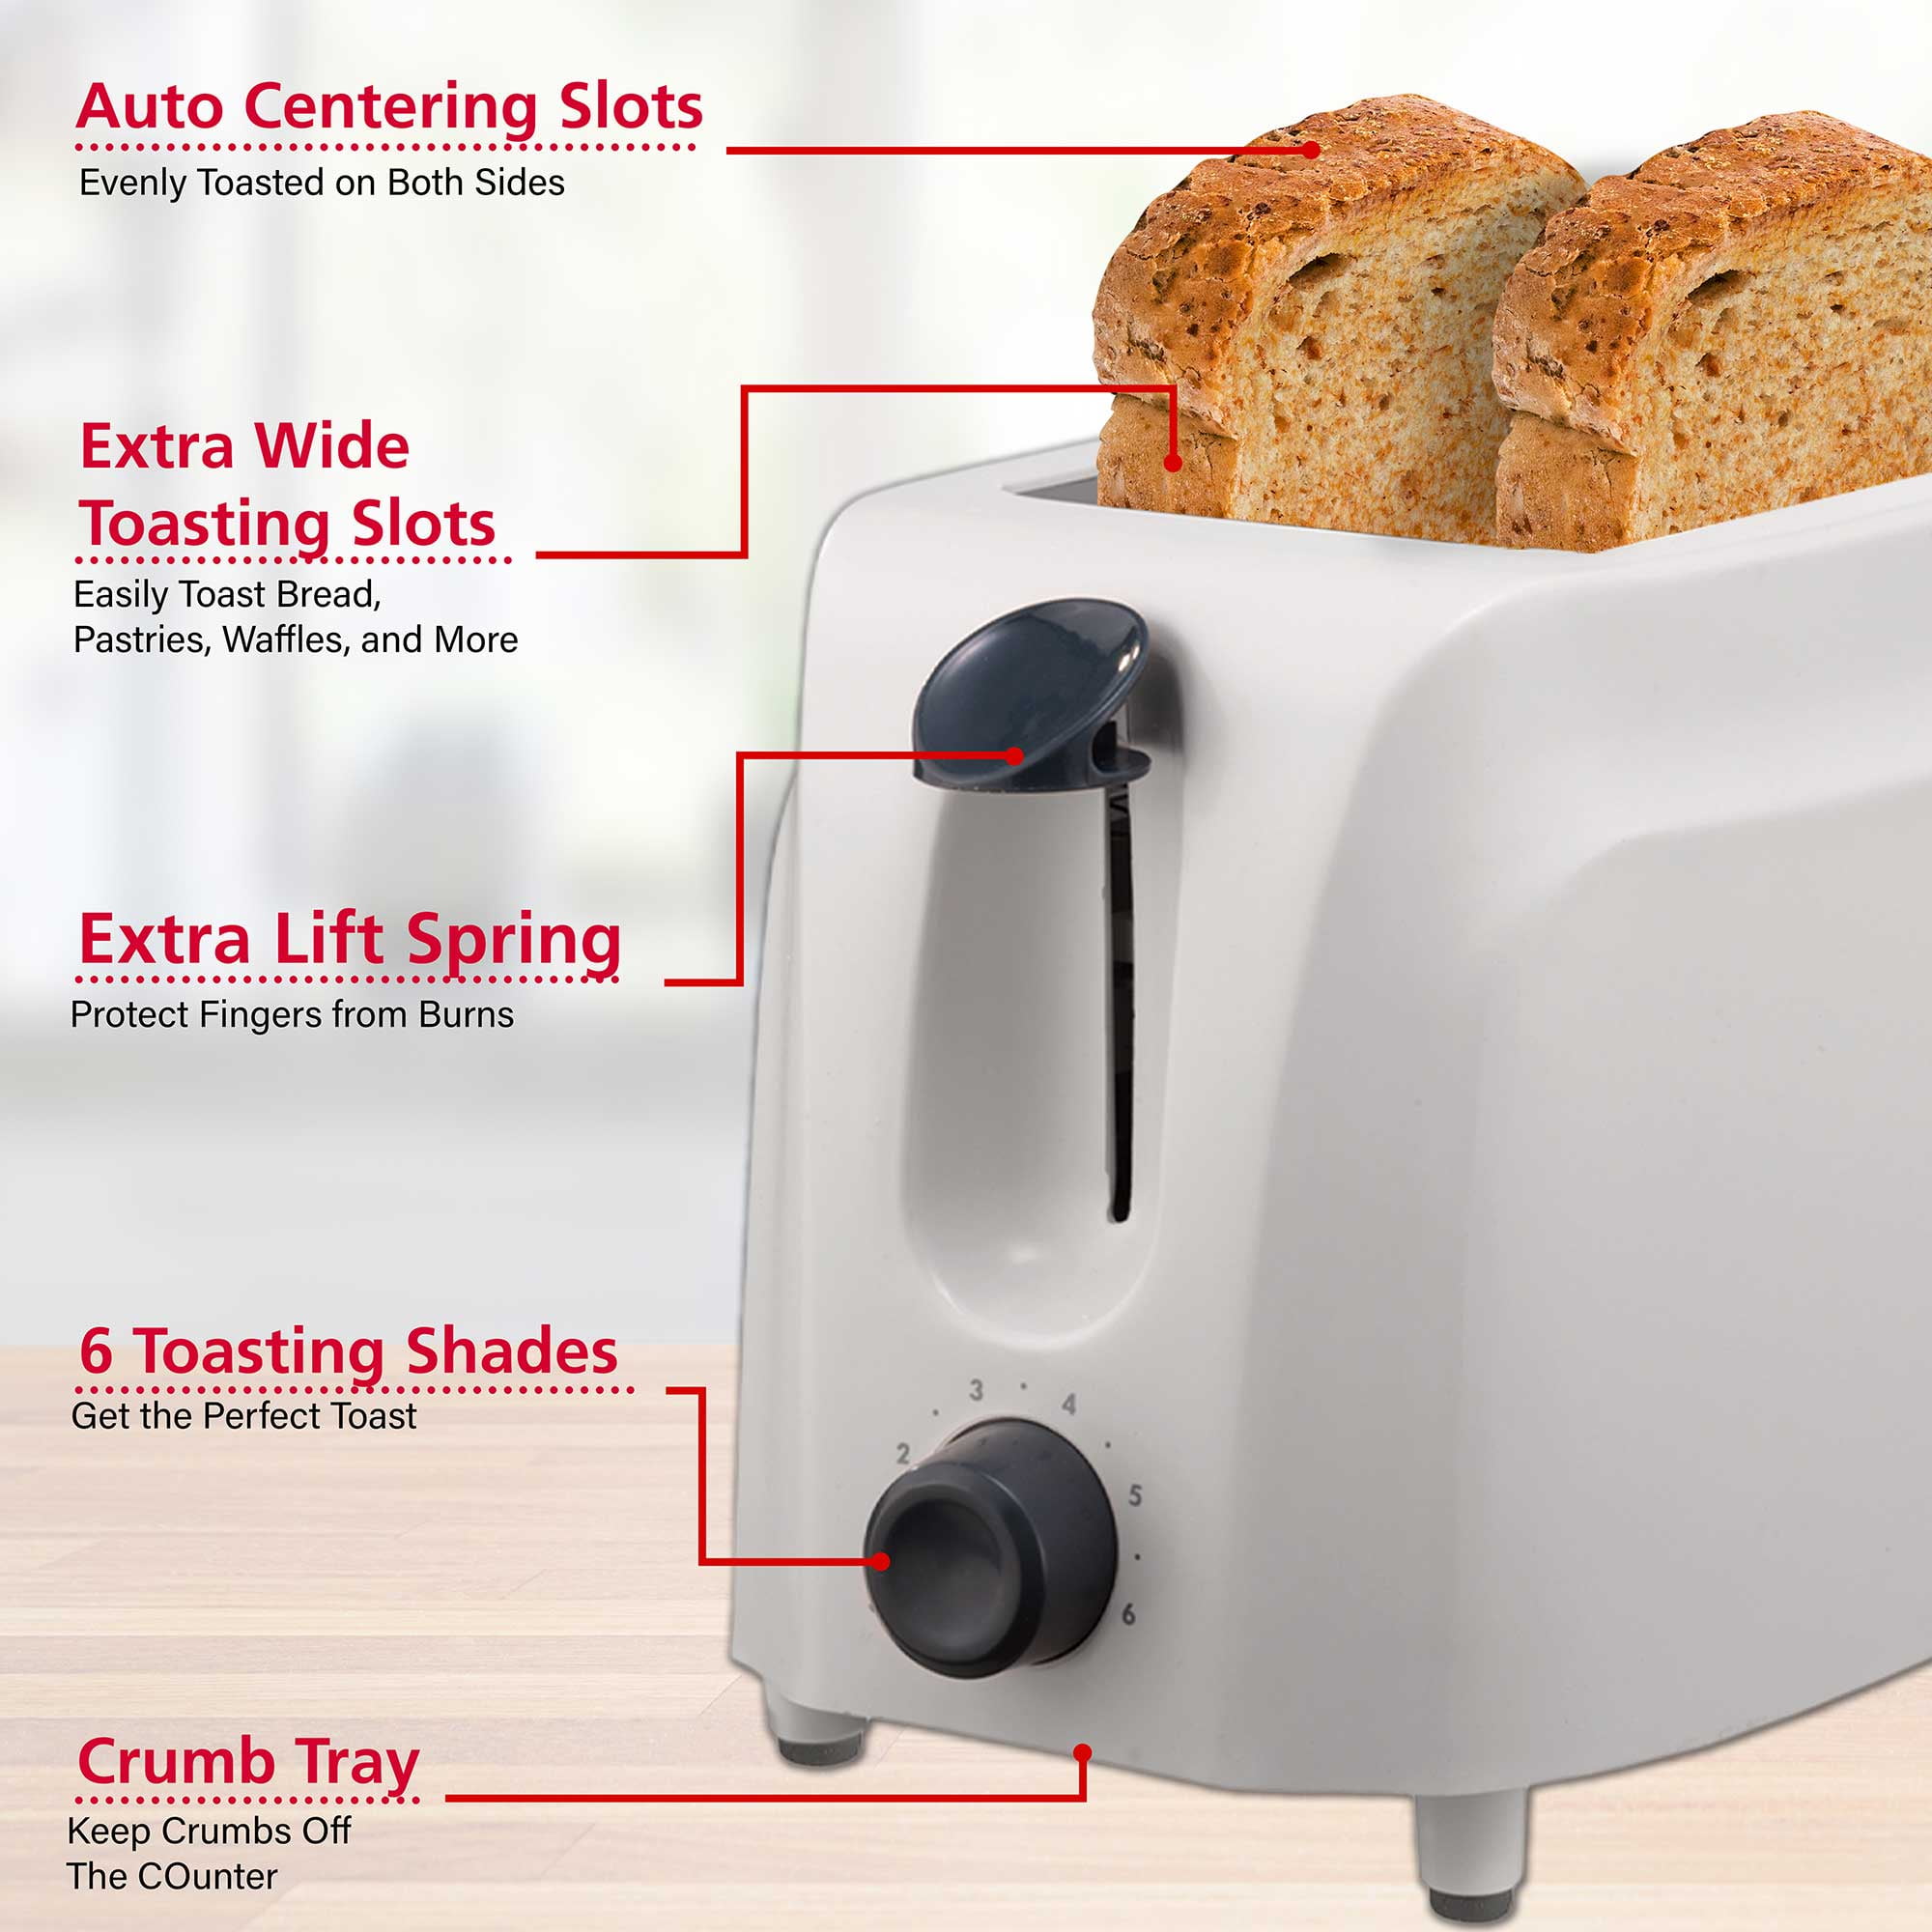 Brentwood Cool Touch TS-292 2-Slice Toaster - red